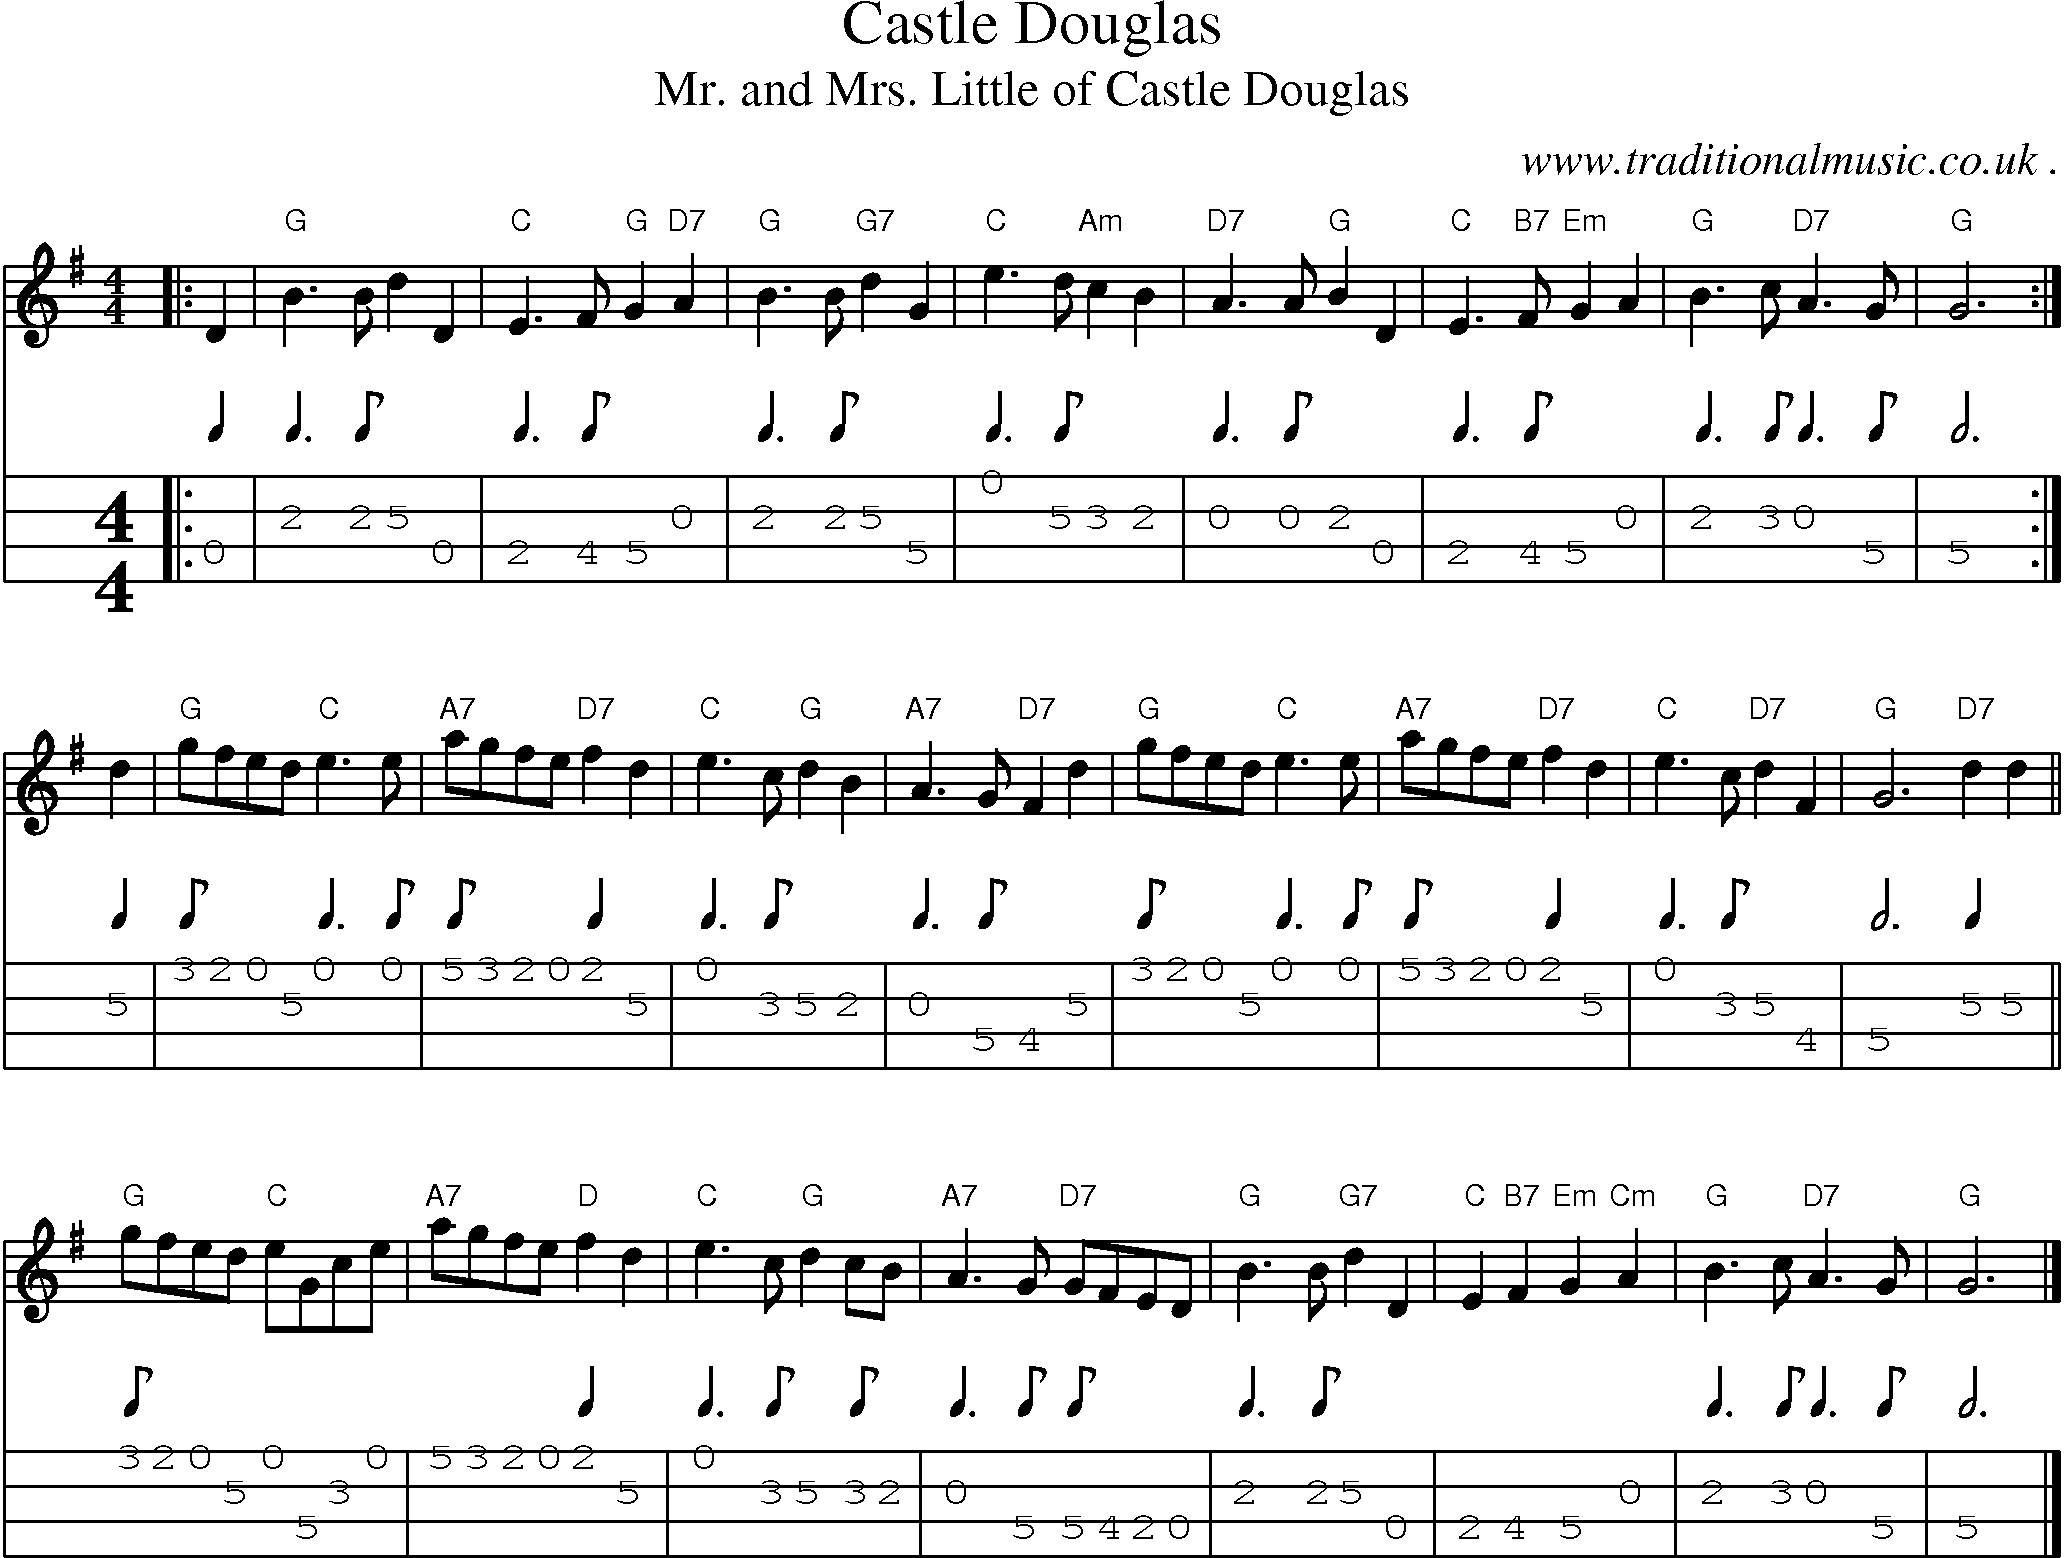 Sheet-music  score, Chords and Mandolin Tabs for Castle Douglas